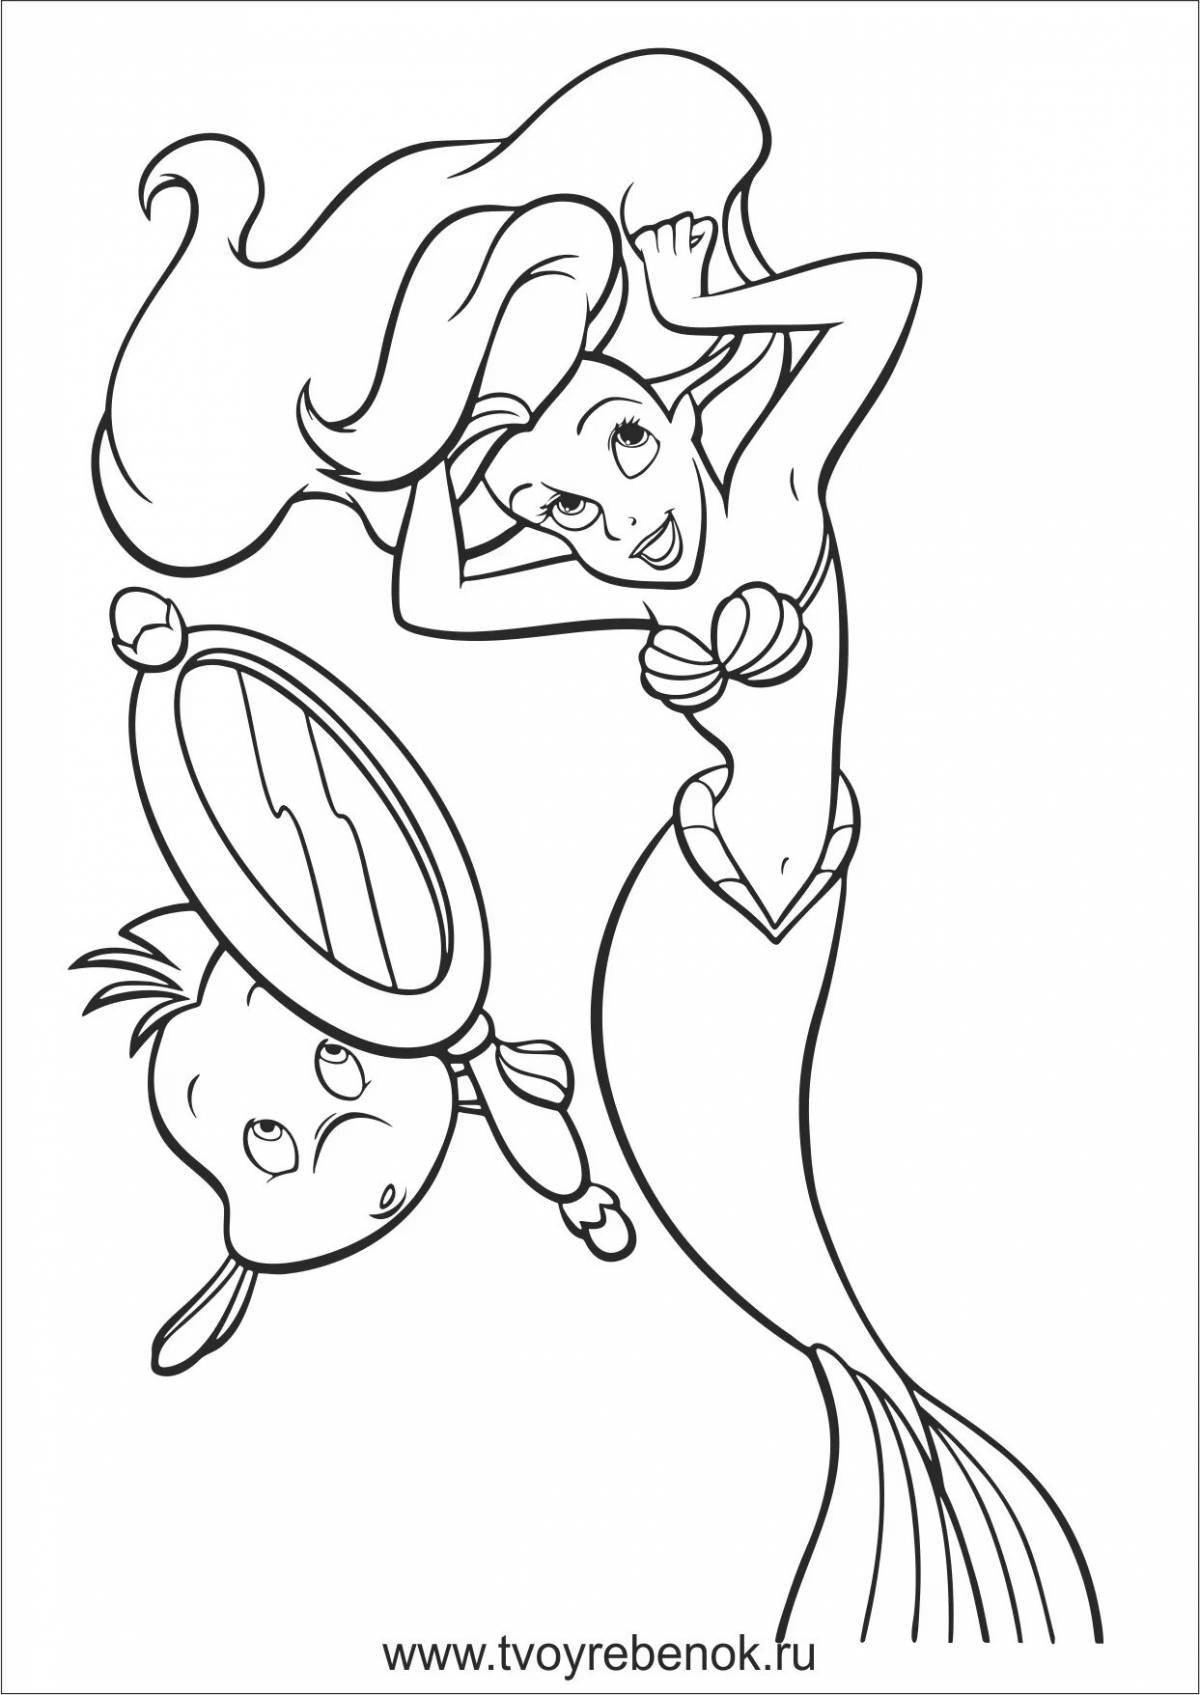 Coloring page shining ariel with legs